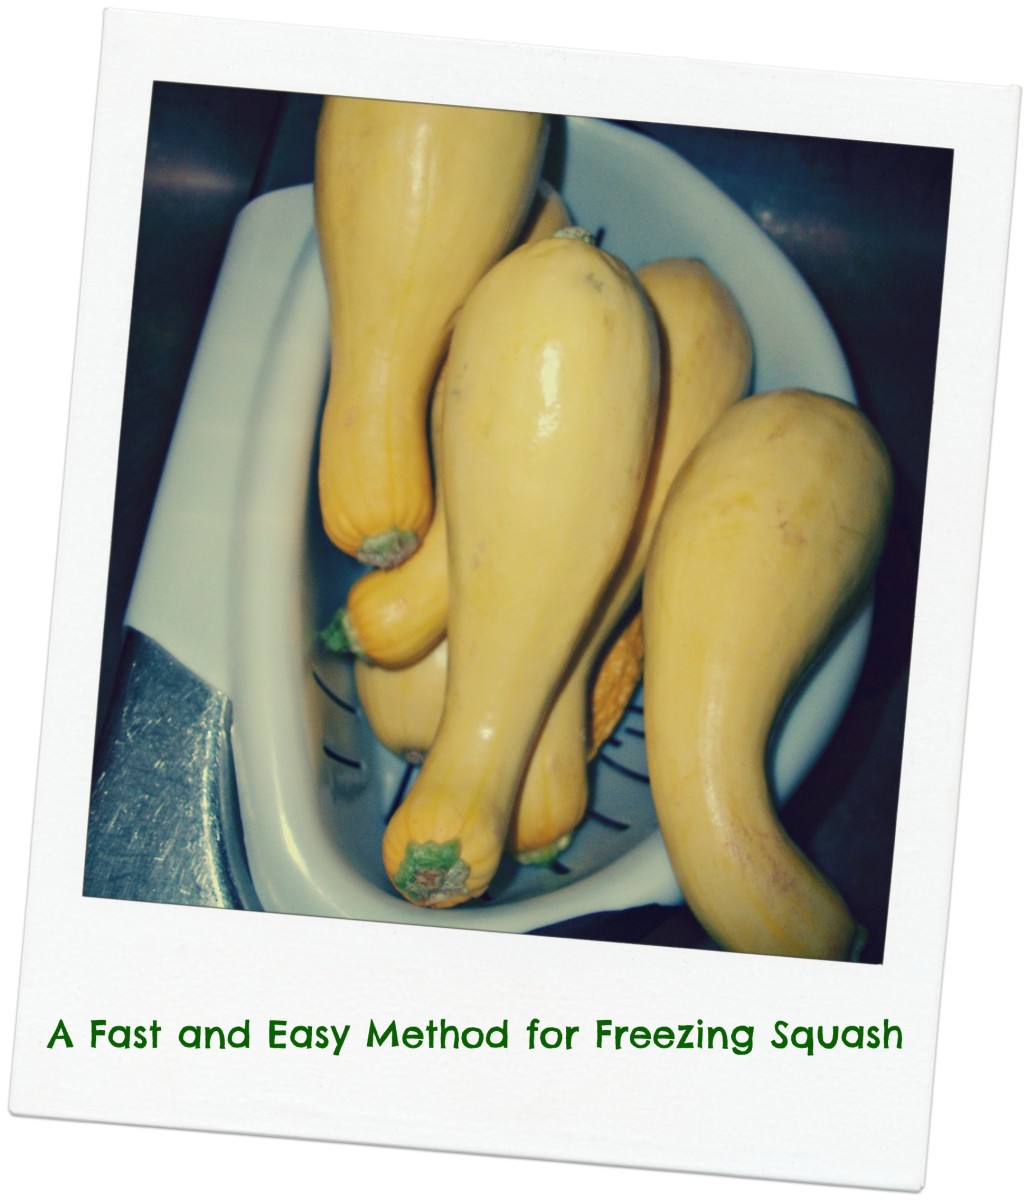 A Fast and Easy Method to Freezing Squash